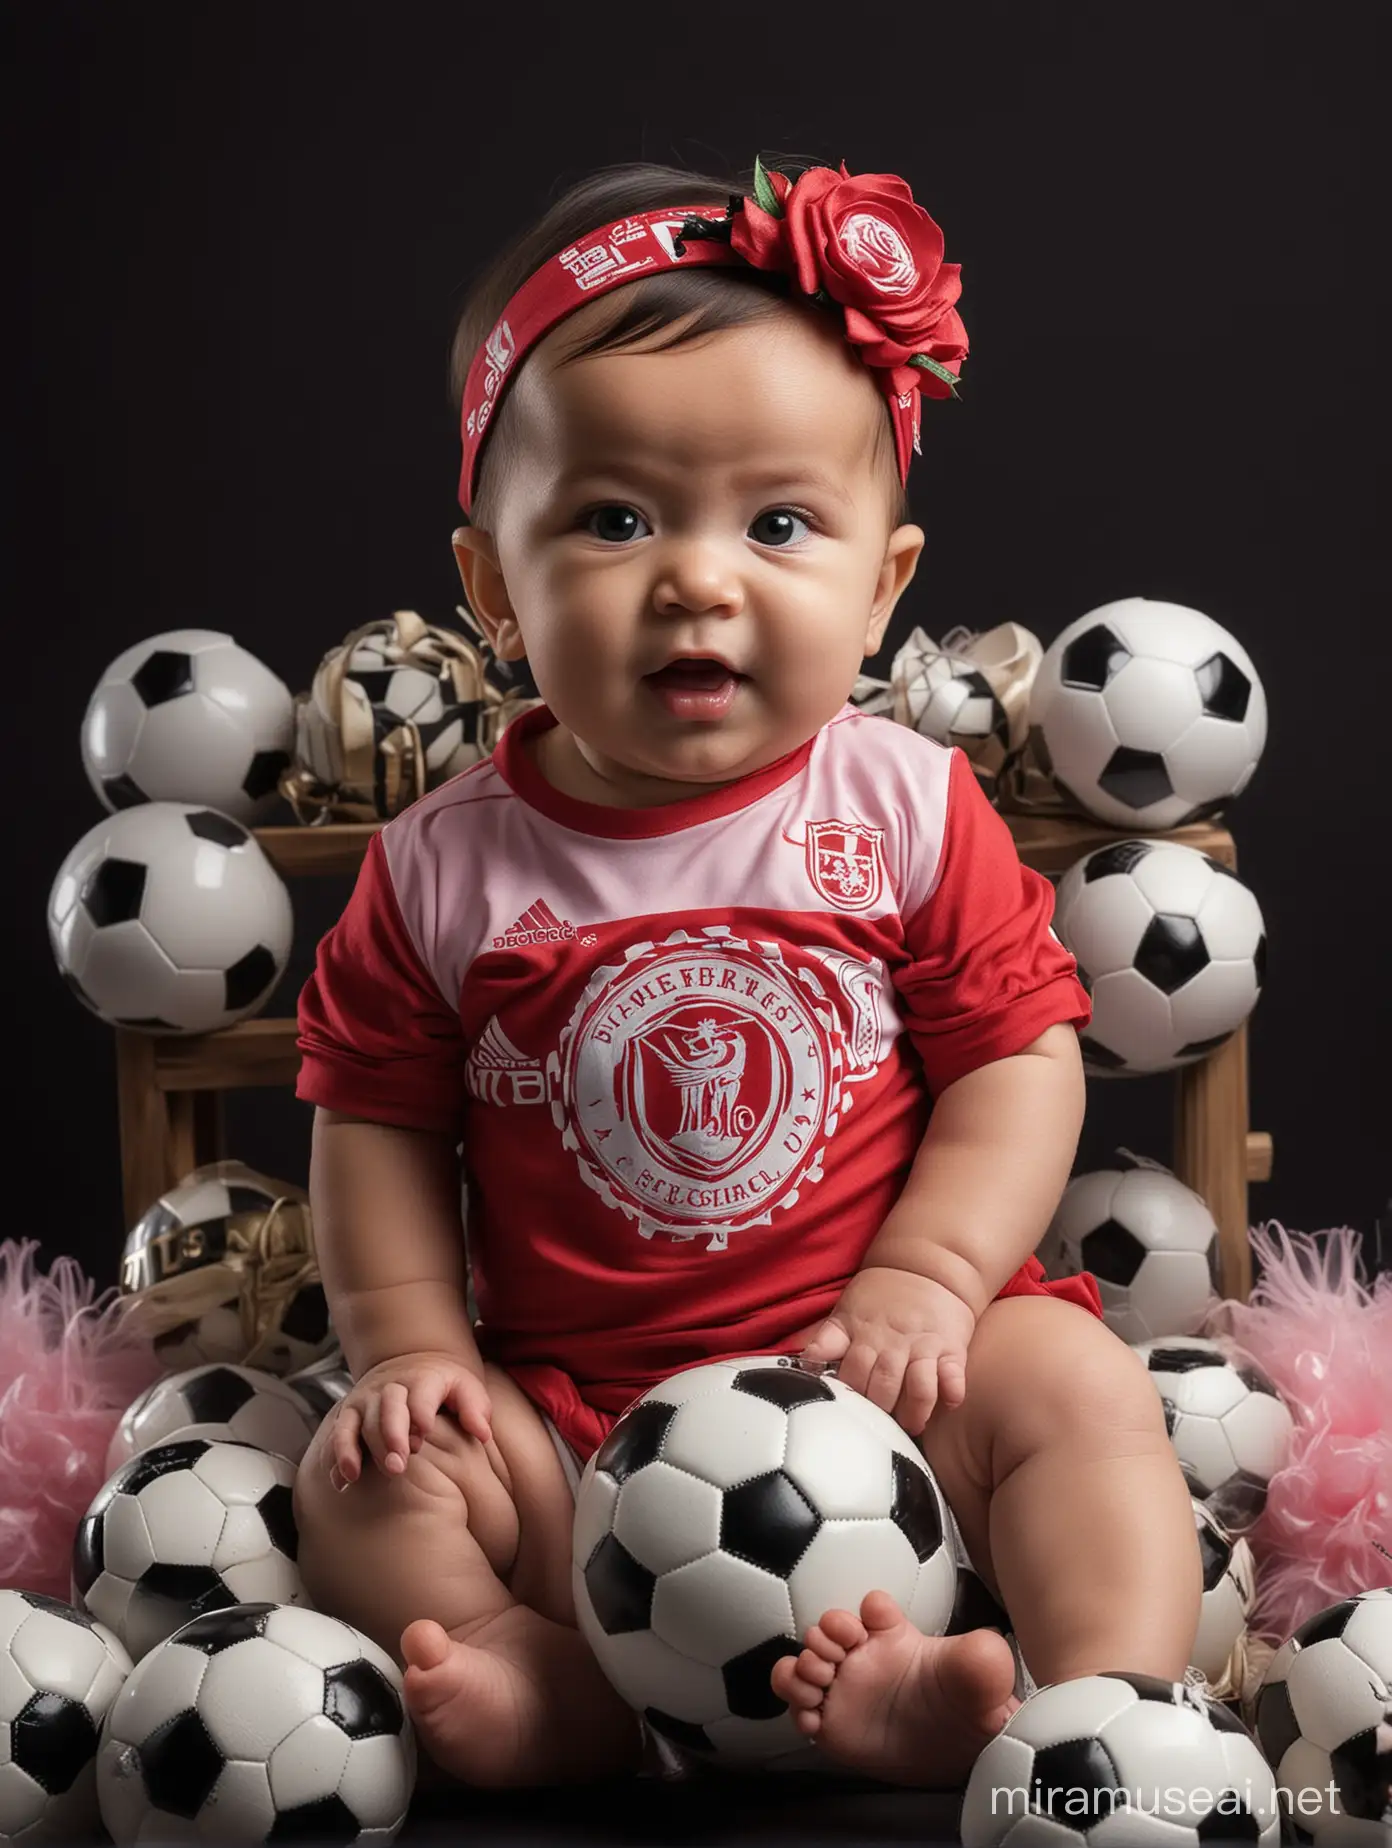 The image is a photoshoot of chubby newborn baby girl, including a collection of soccer-themed items, wearing PSM Makassar branded clothing and rose headband , surrounded by soccer balls, mini goal and other merchandise. PSM Makassar is a professional soccer club based in Makassar, Indonesia, that competes in the Liga 1. The image seems to show the baby’s support for the team. Red Color, black backdrop background, studio photo. underexposure